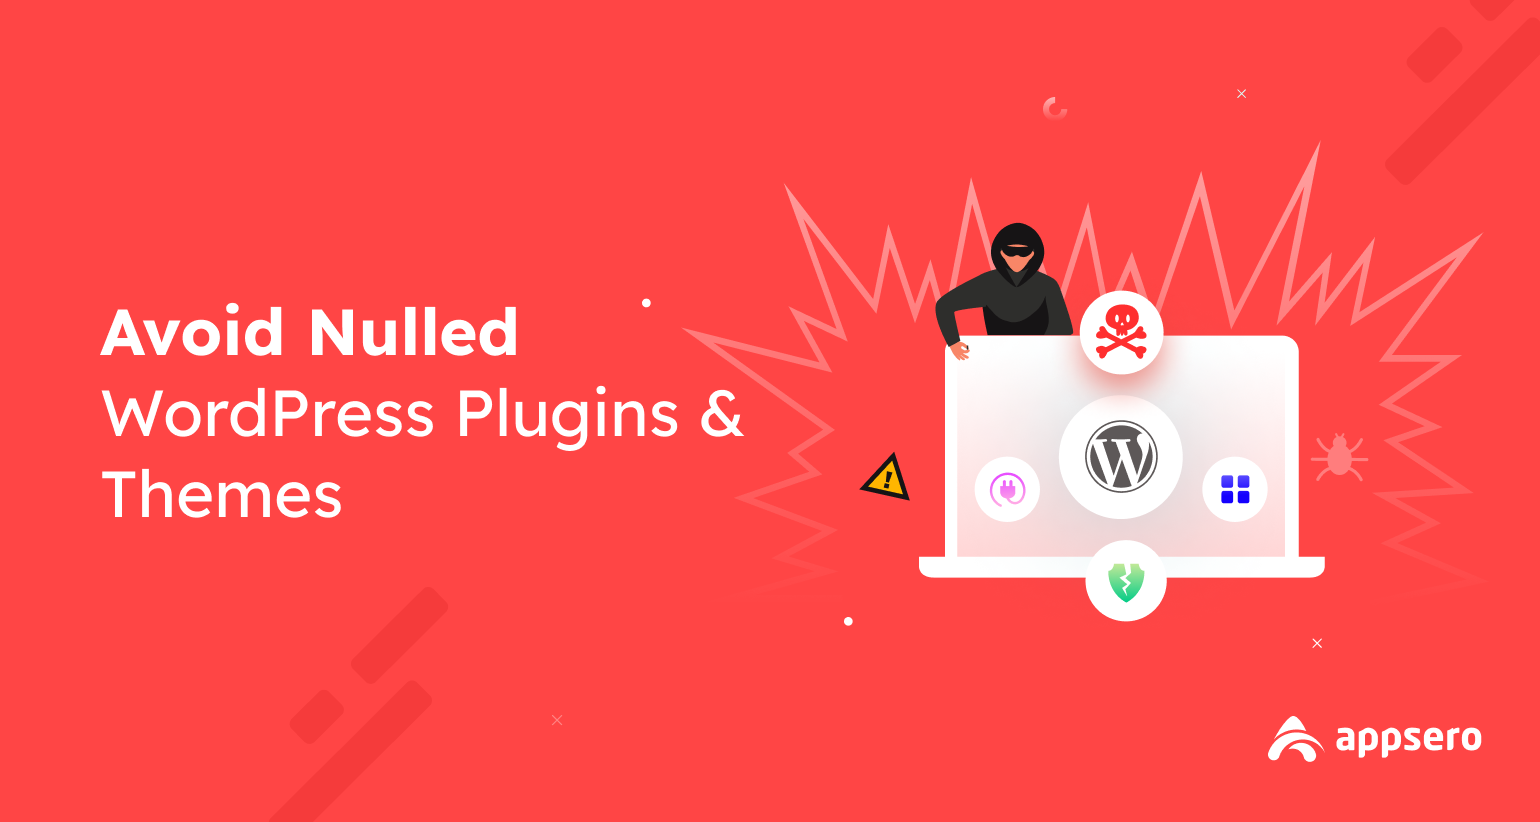 Why You Should Avoid Nulled WordPress Plugins and Themes – 9 Valid Reasons